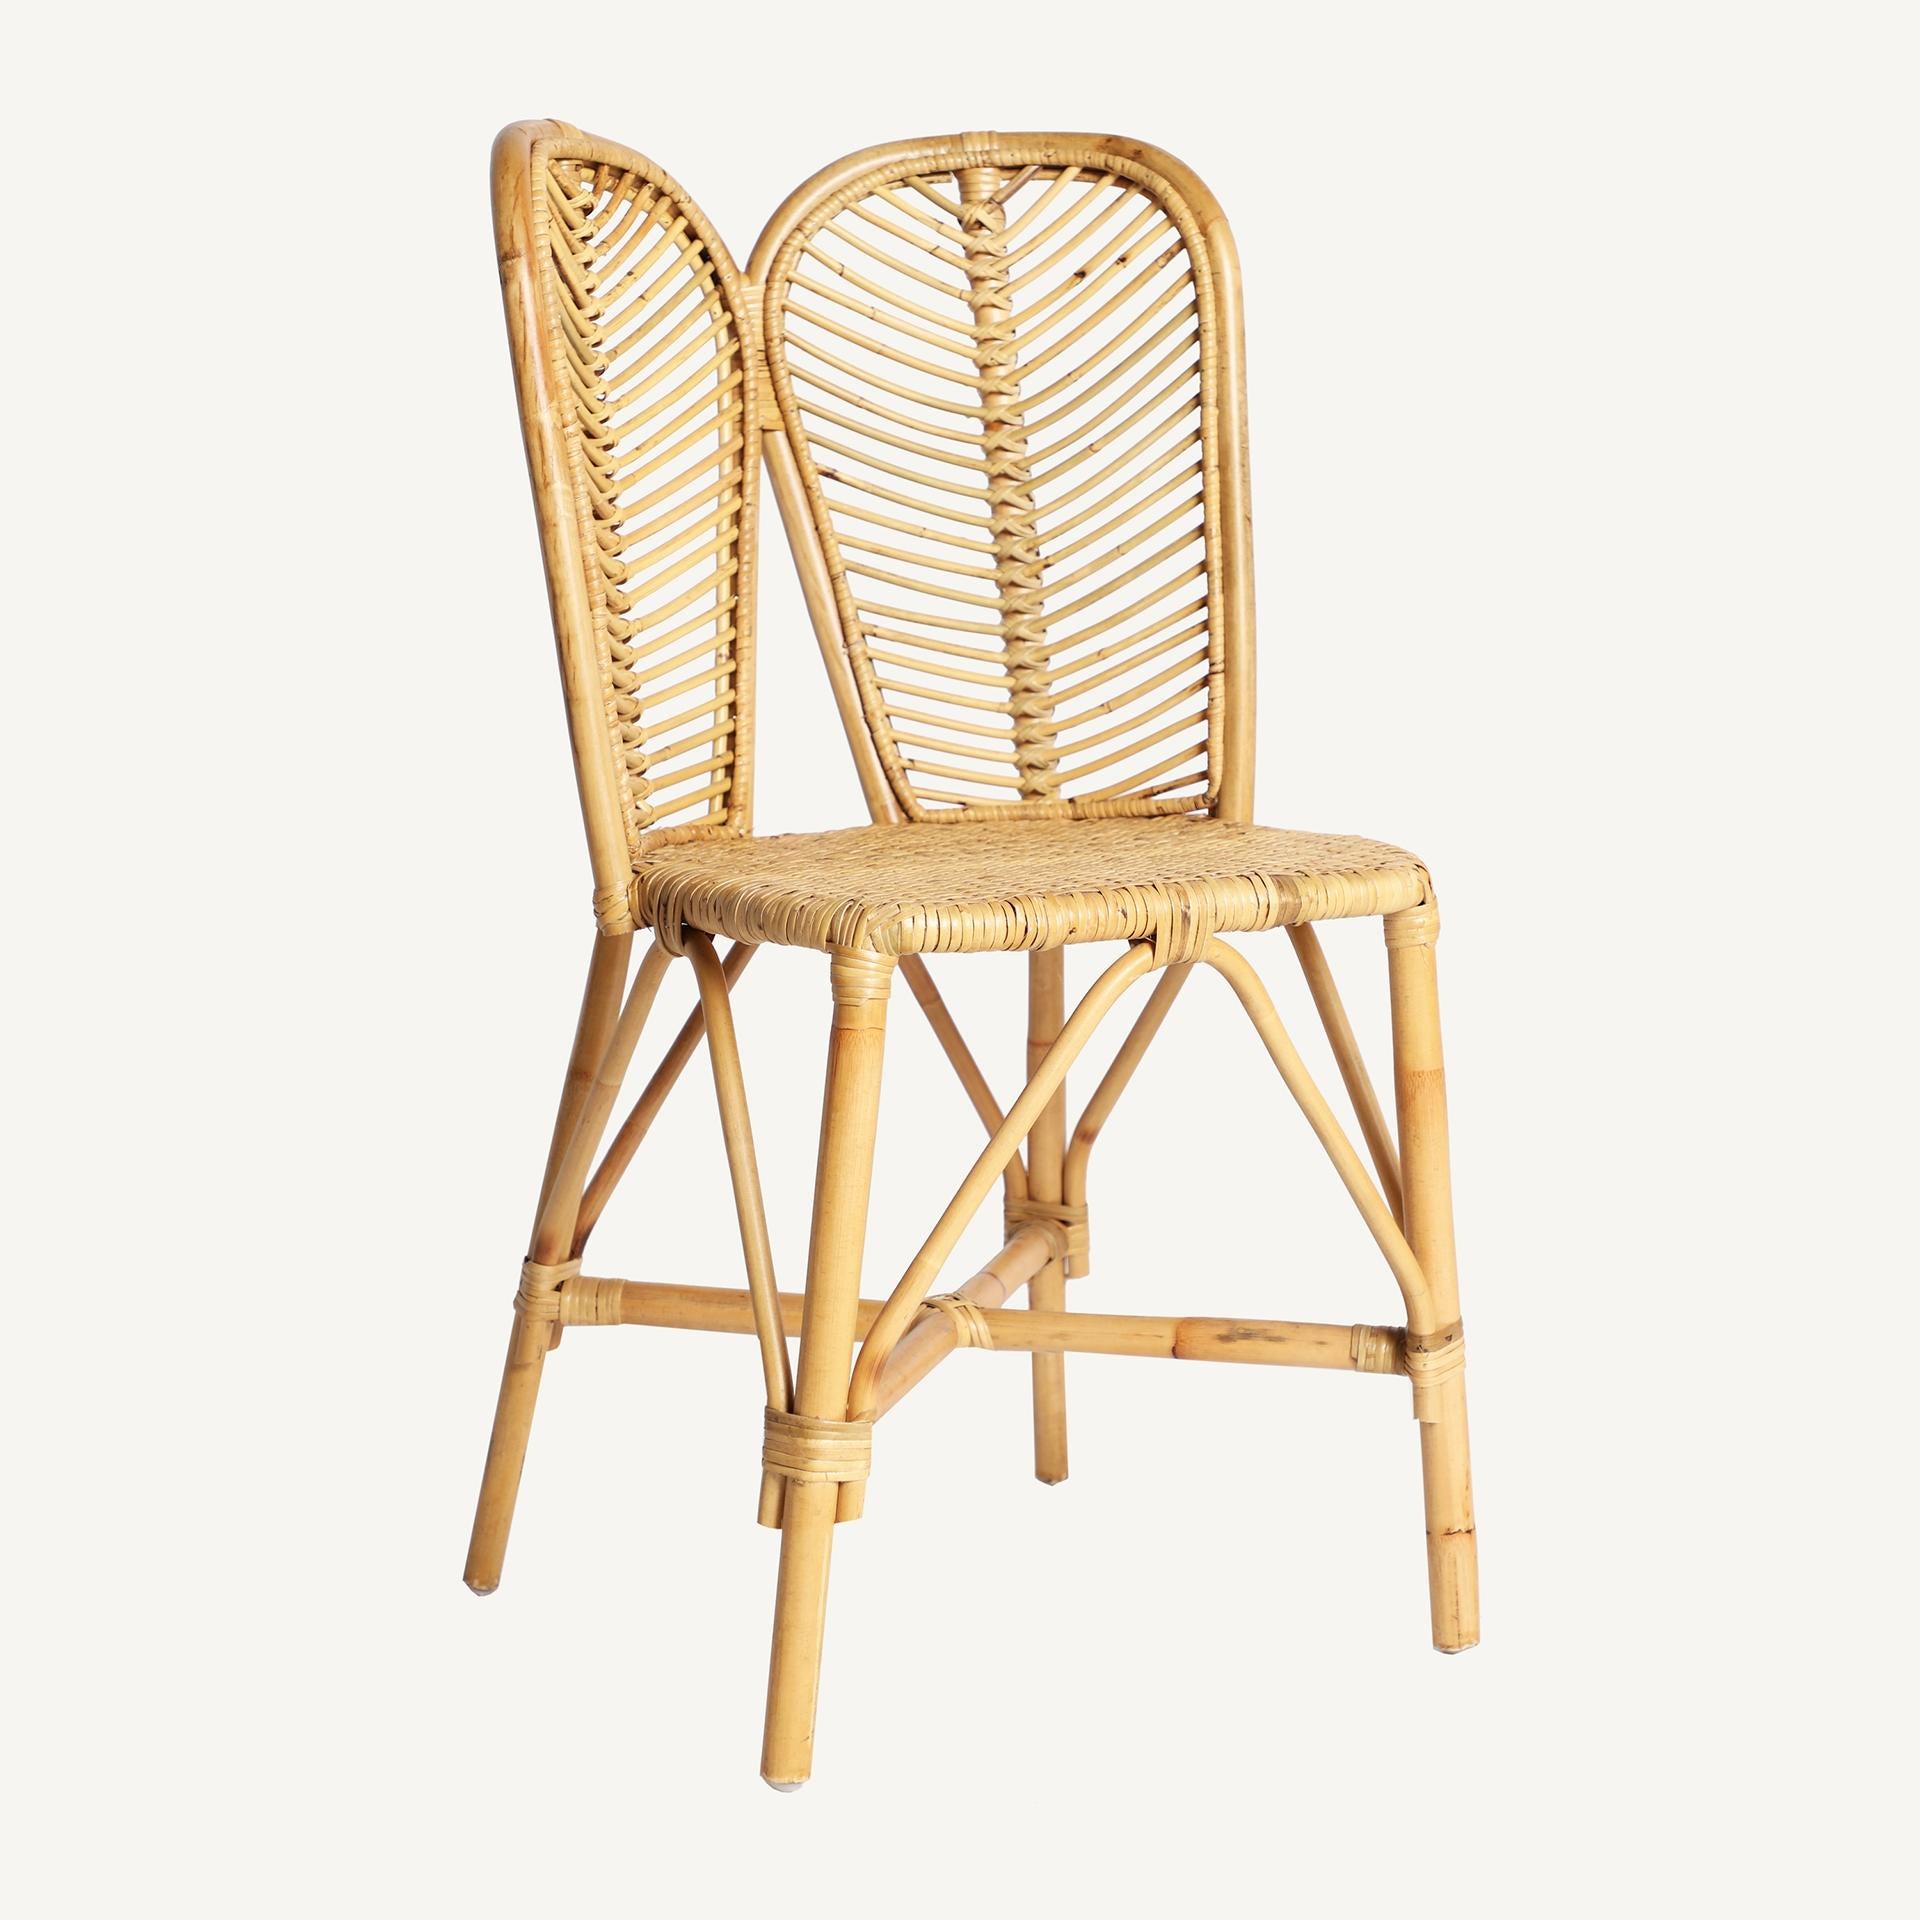 XXIe siècle et contemporain 1960s Italian Design Style Handcrafted Rattan And Wicker Seat Chair en vente